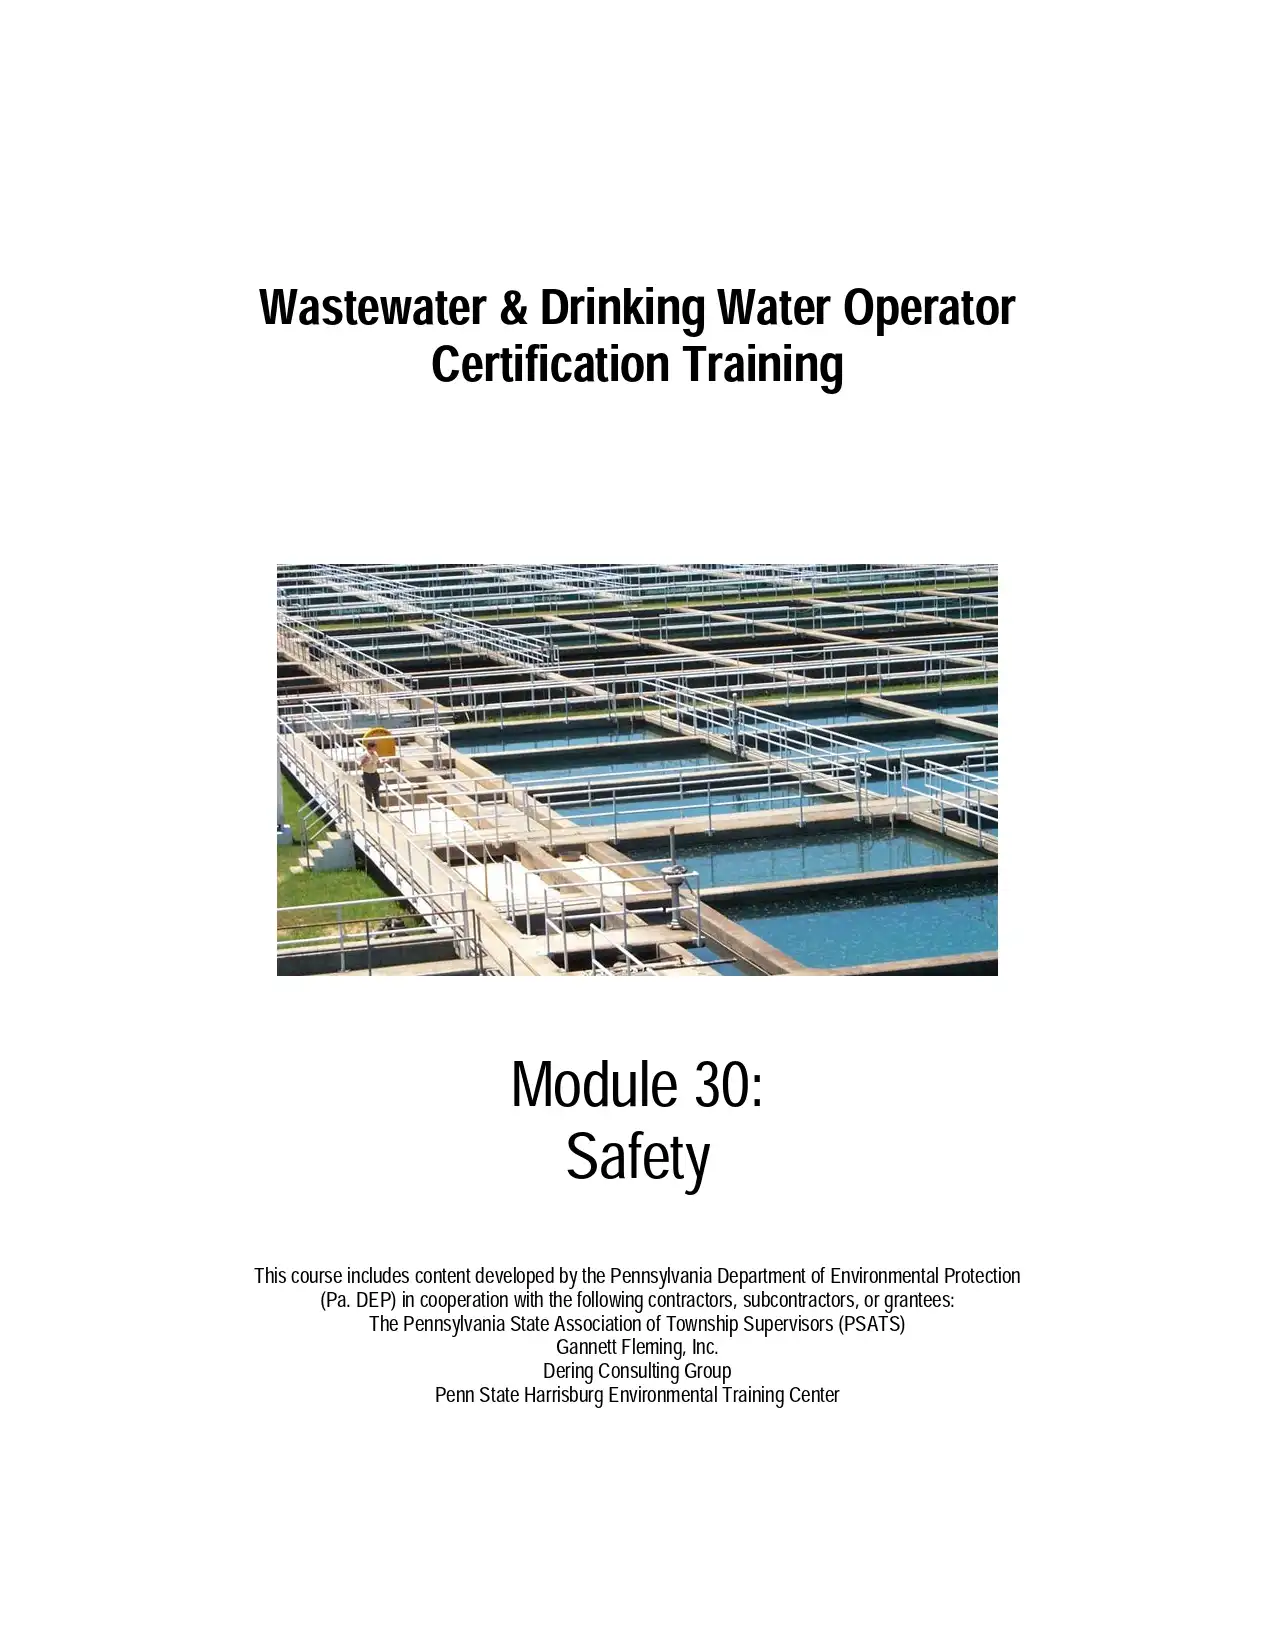 Wastewater & Drinking Water Operator Certification Training Module 30: Safety